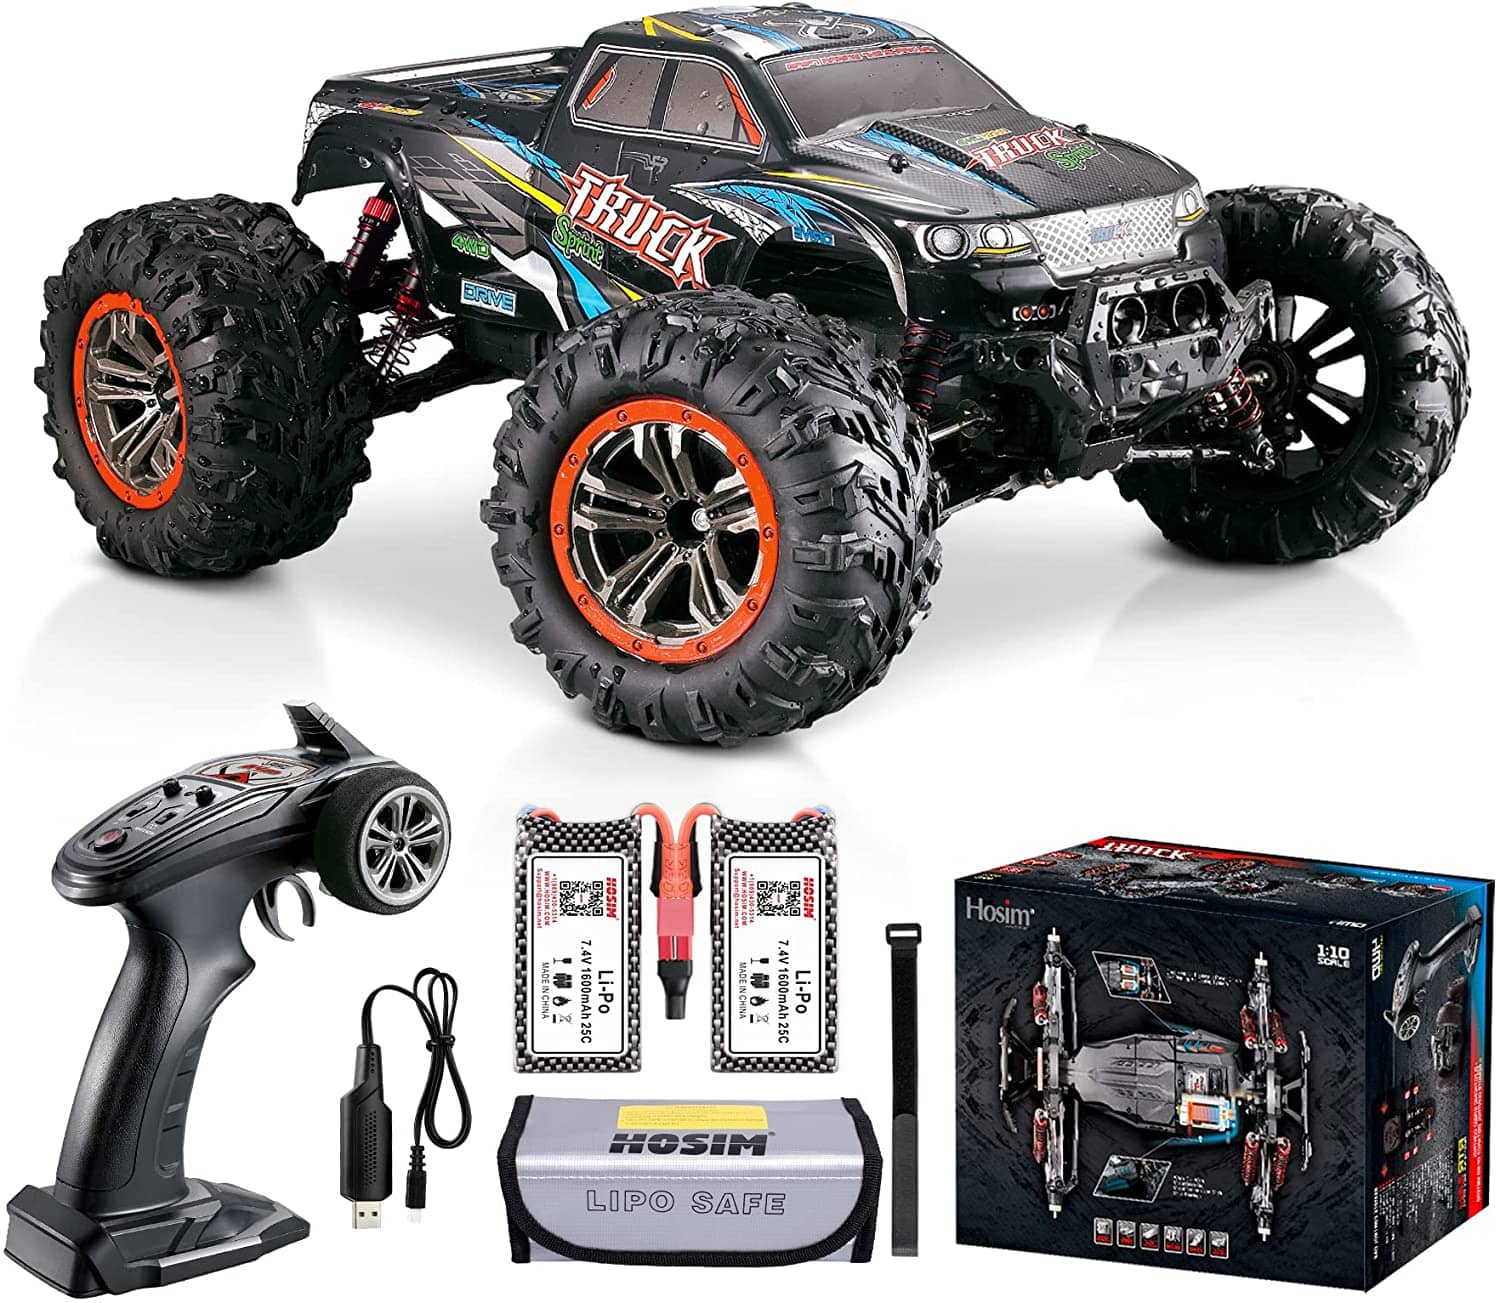 Hosim 1/10 Scale RC Car Monster Truck 9125 with 2 Batteries Blue